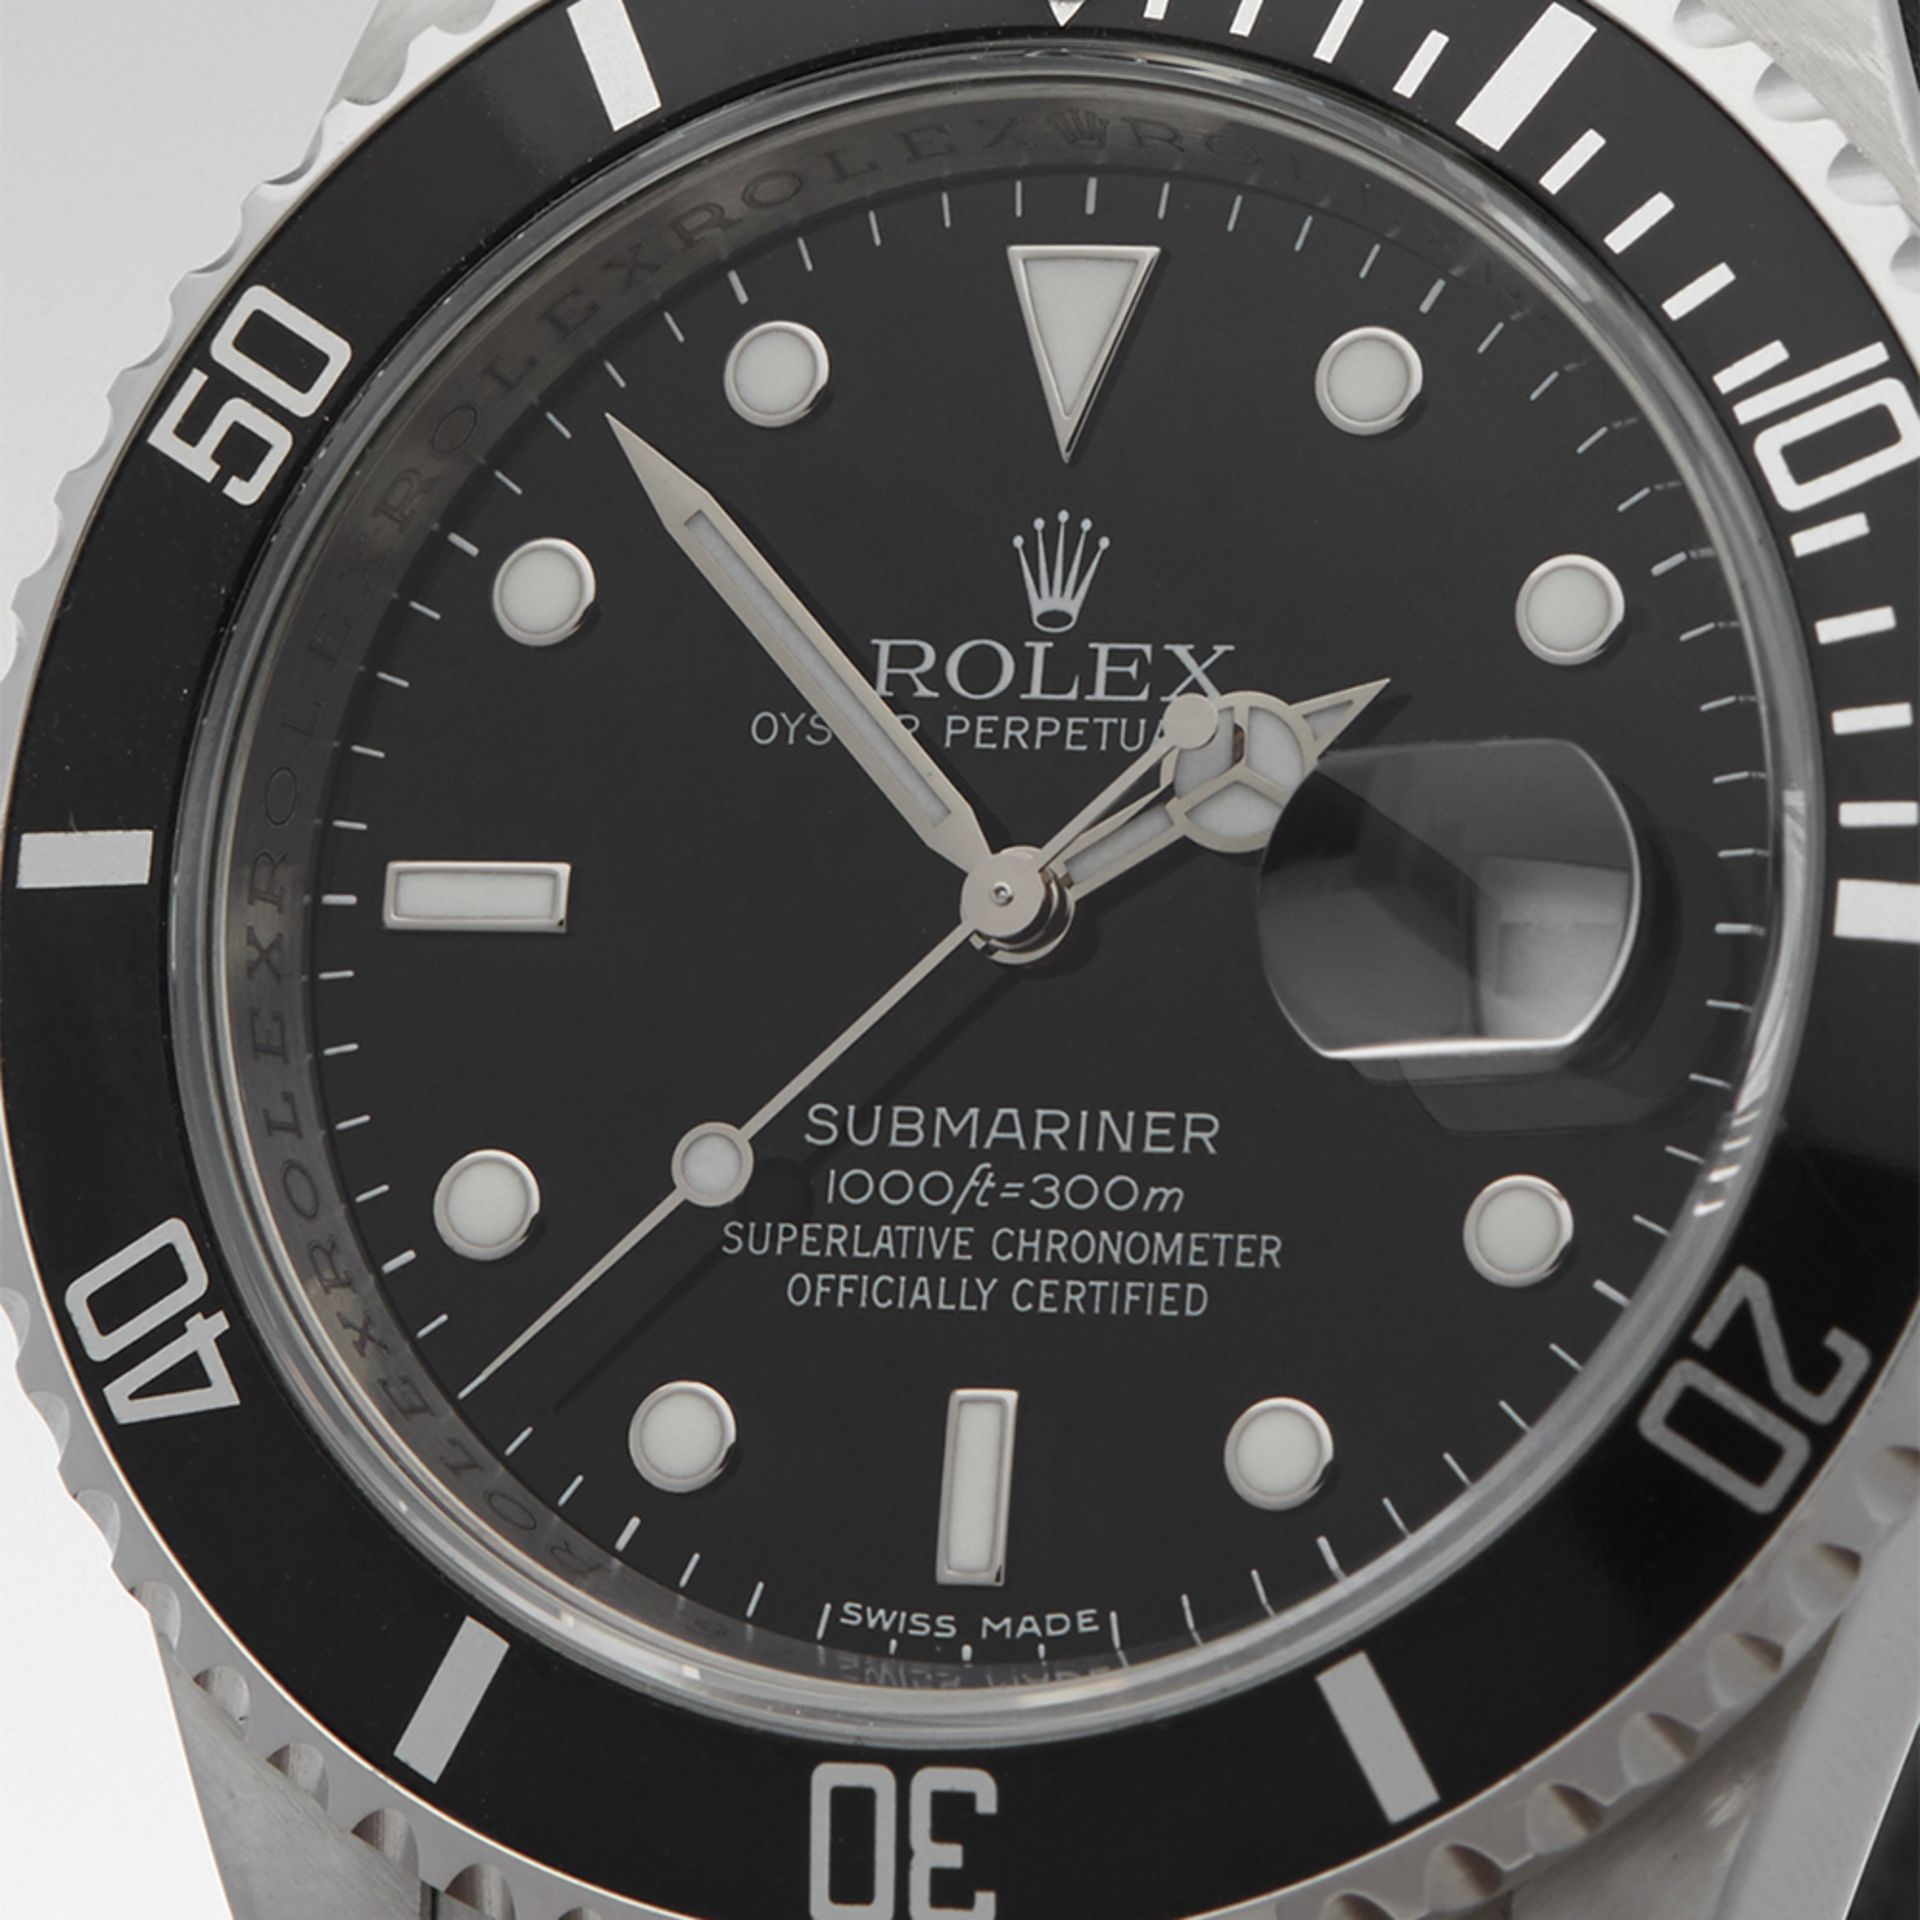 Submariner 40mm Stainless Steel - 16610LN - Image 3 of 9